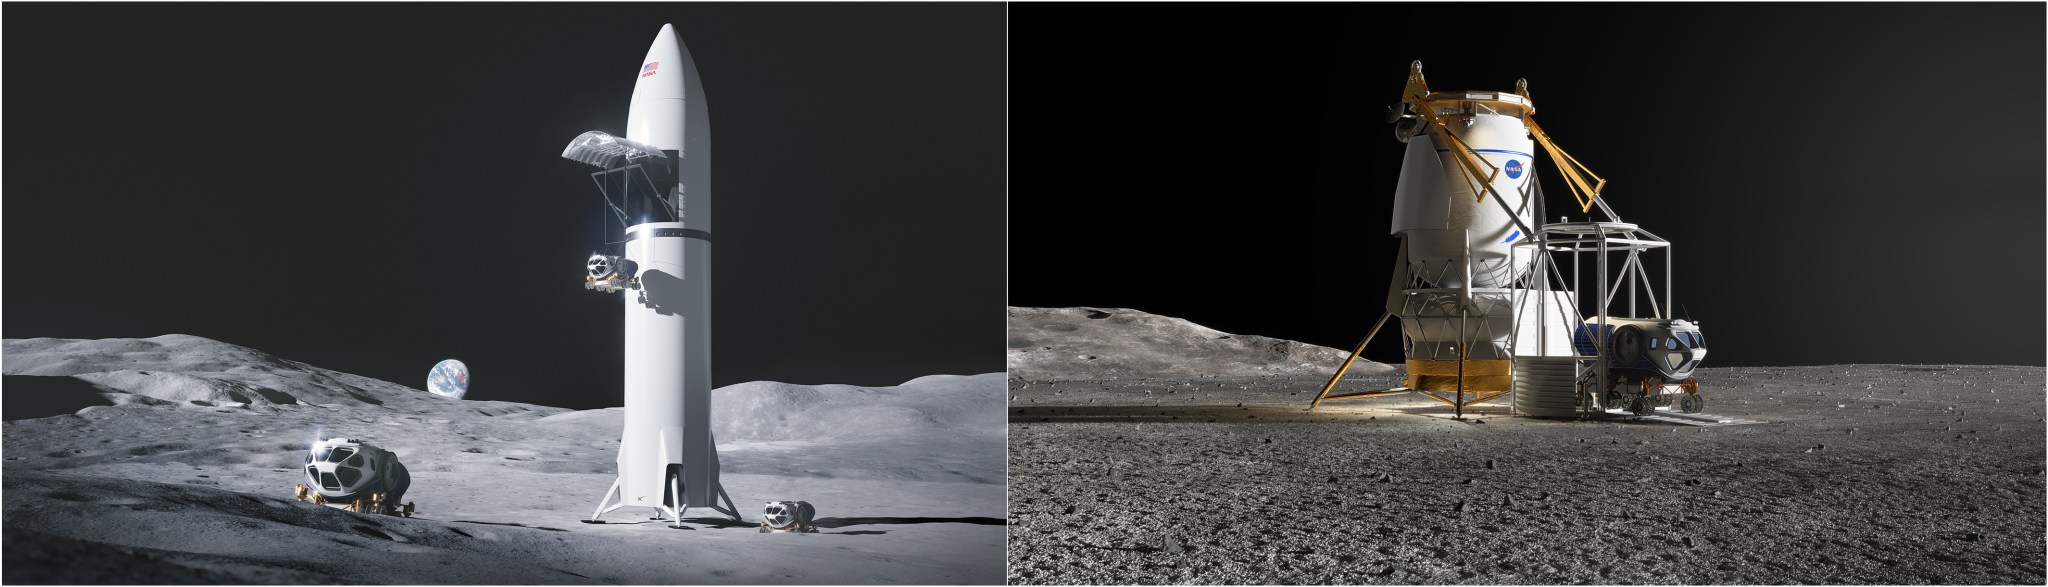 Early conceptual renderings of cargo variants of human lunar landing systems from NASA’s providers SpaceX, left, and Blue Origin, right. Both industry teams have been given authority to begin design work to provide large cargo landers capable of delivering up to 15 metric tons of cargo, such as a pressurized rover, to the Moon’s surface.